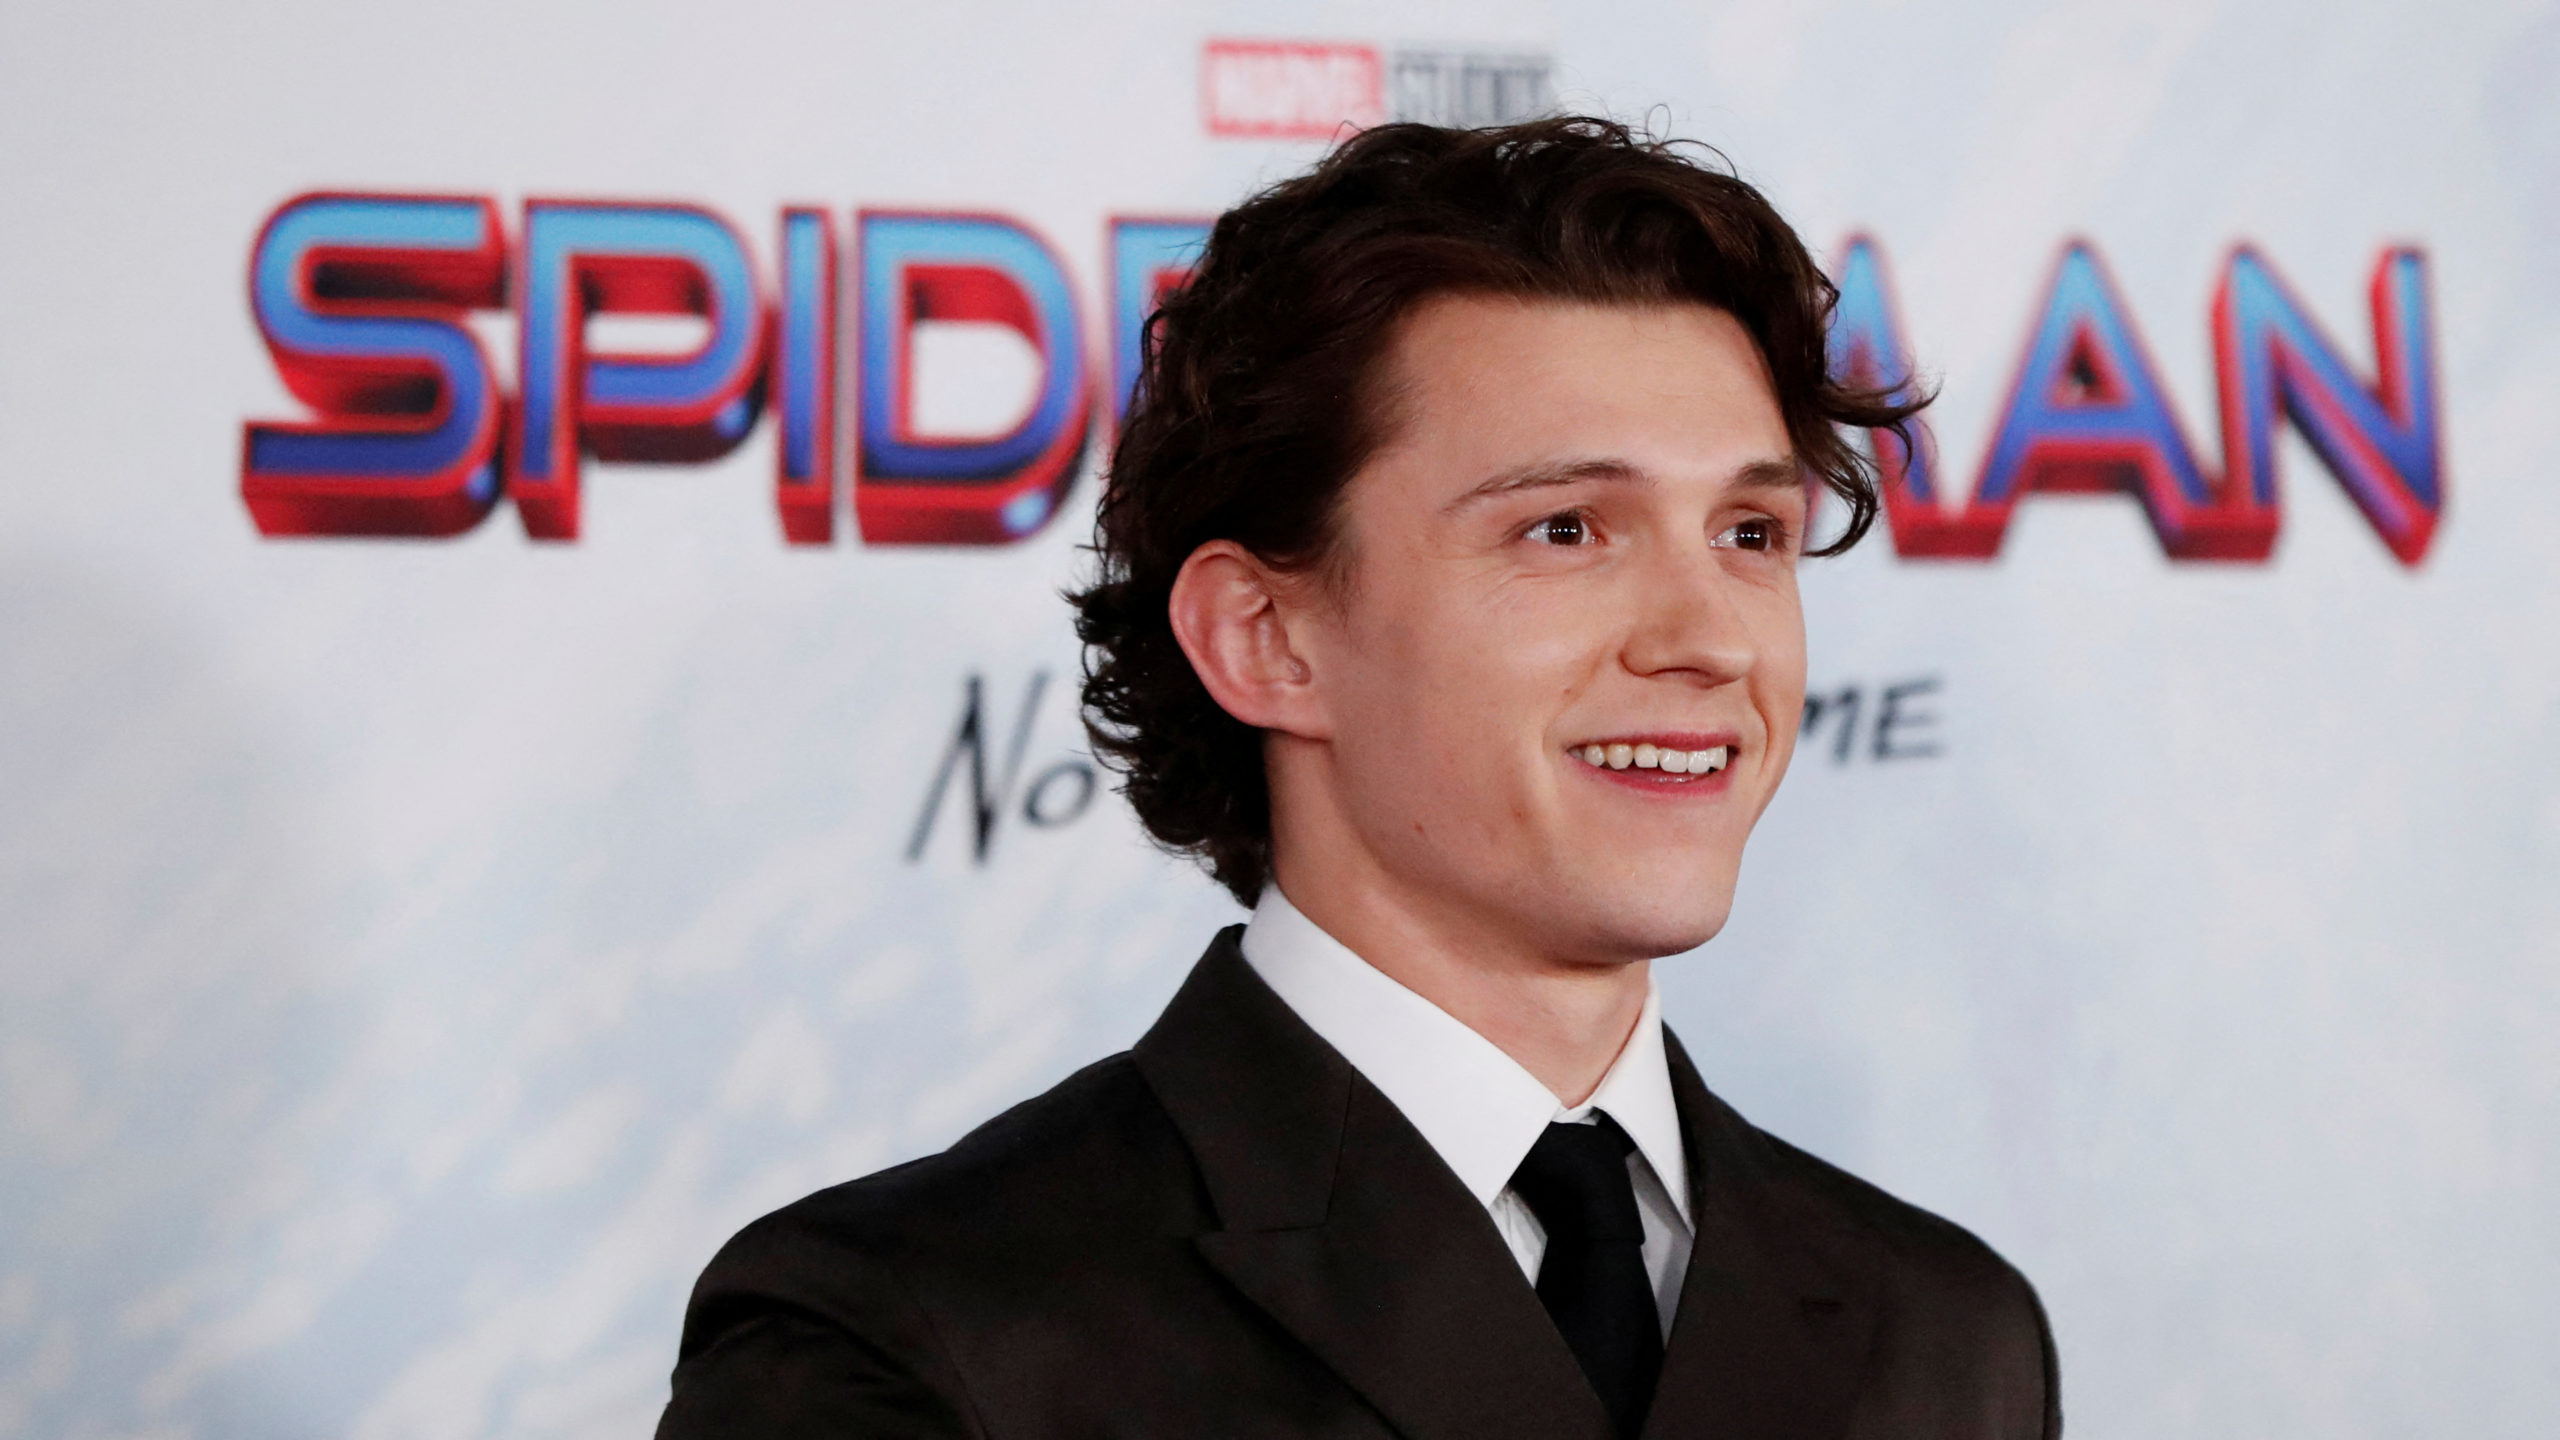 Cast member Tom Holland attends the premiere for the film "Spider-Man: No Way Home" in Los Angeles, California, December 13, 2021. REUTERS/Mario Anzuoni/File Photo